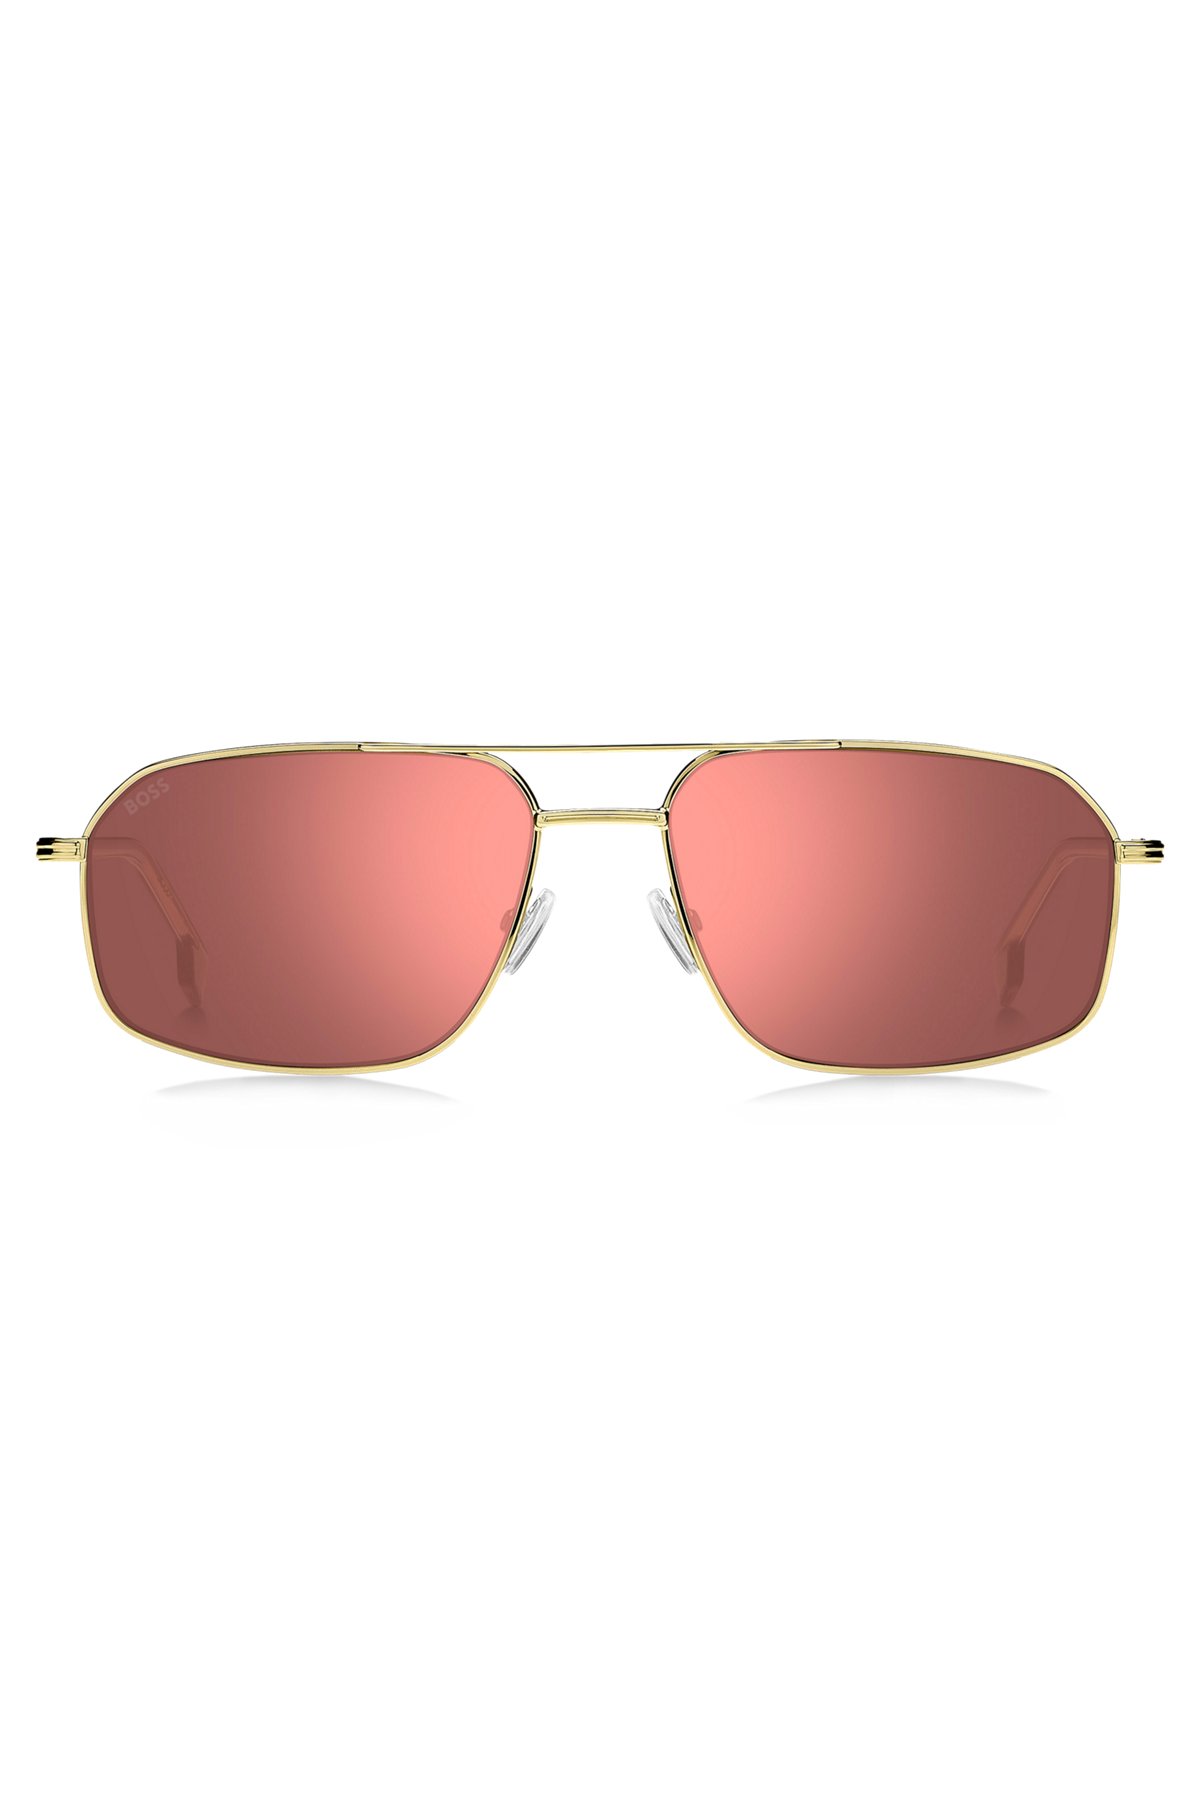 Gold-tone sunglasses with pink lenses, Gold